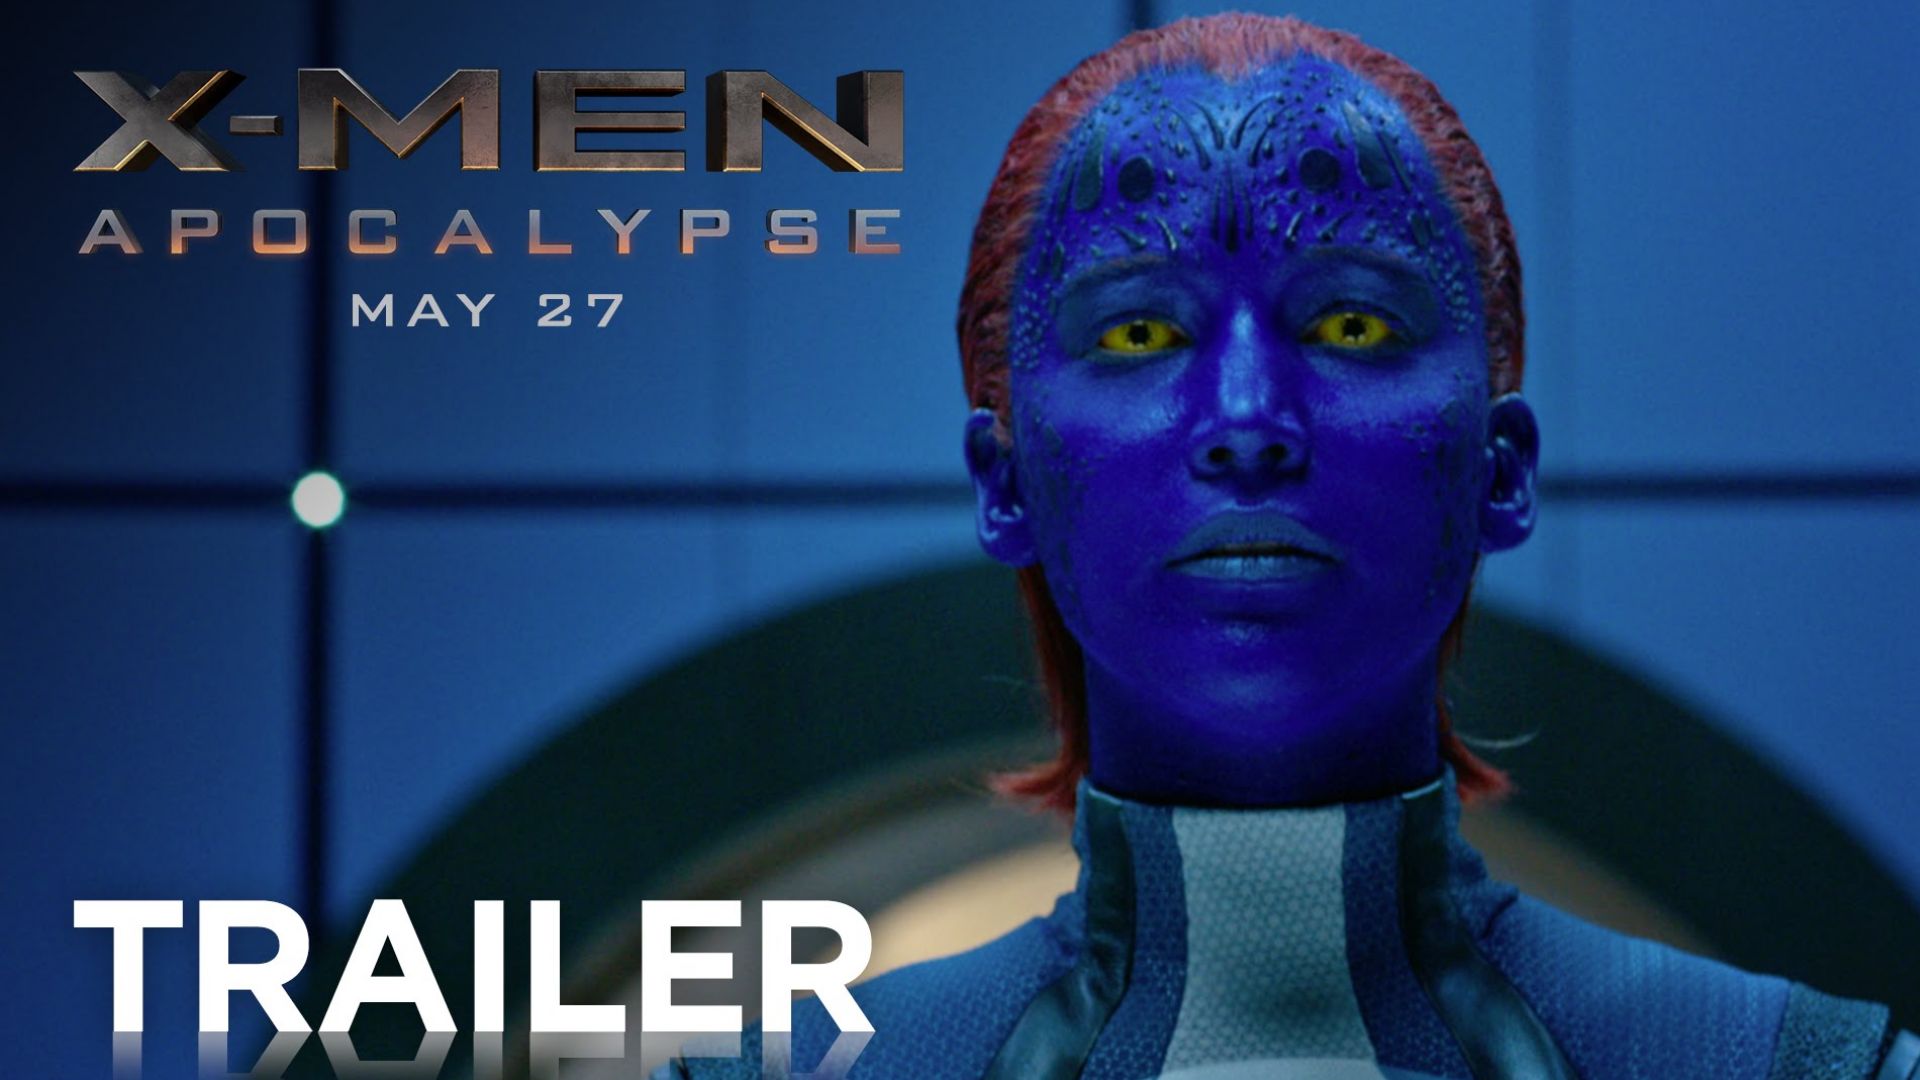 Watch the epic new trailer for X-Men: Apocalypse